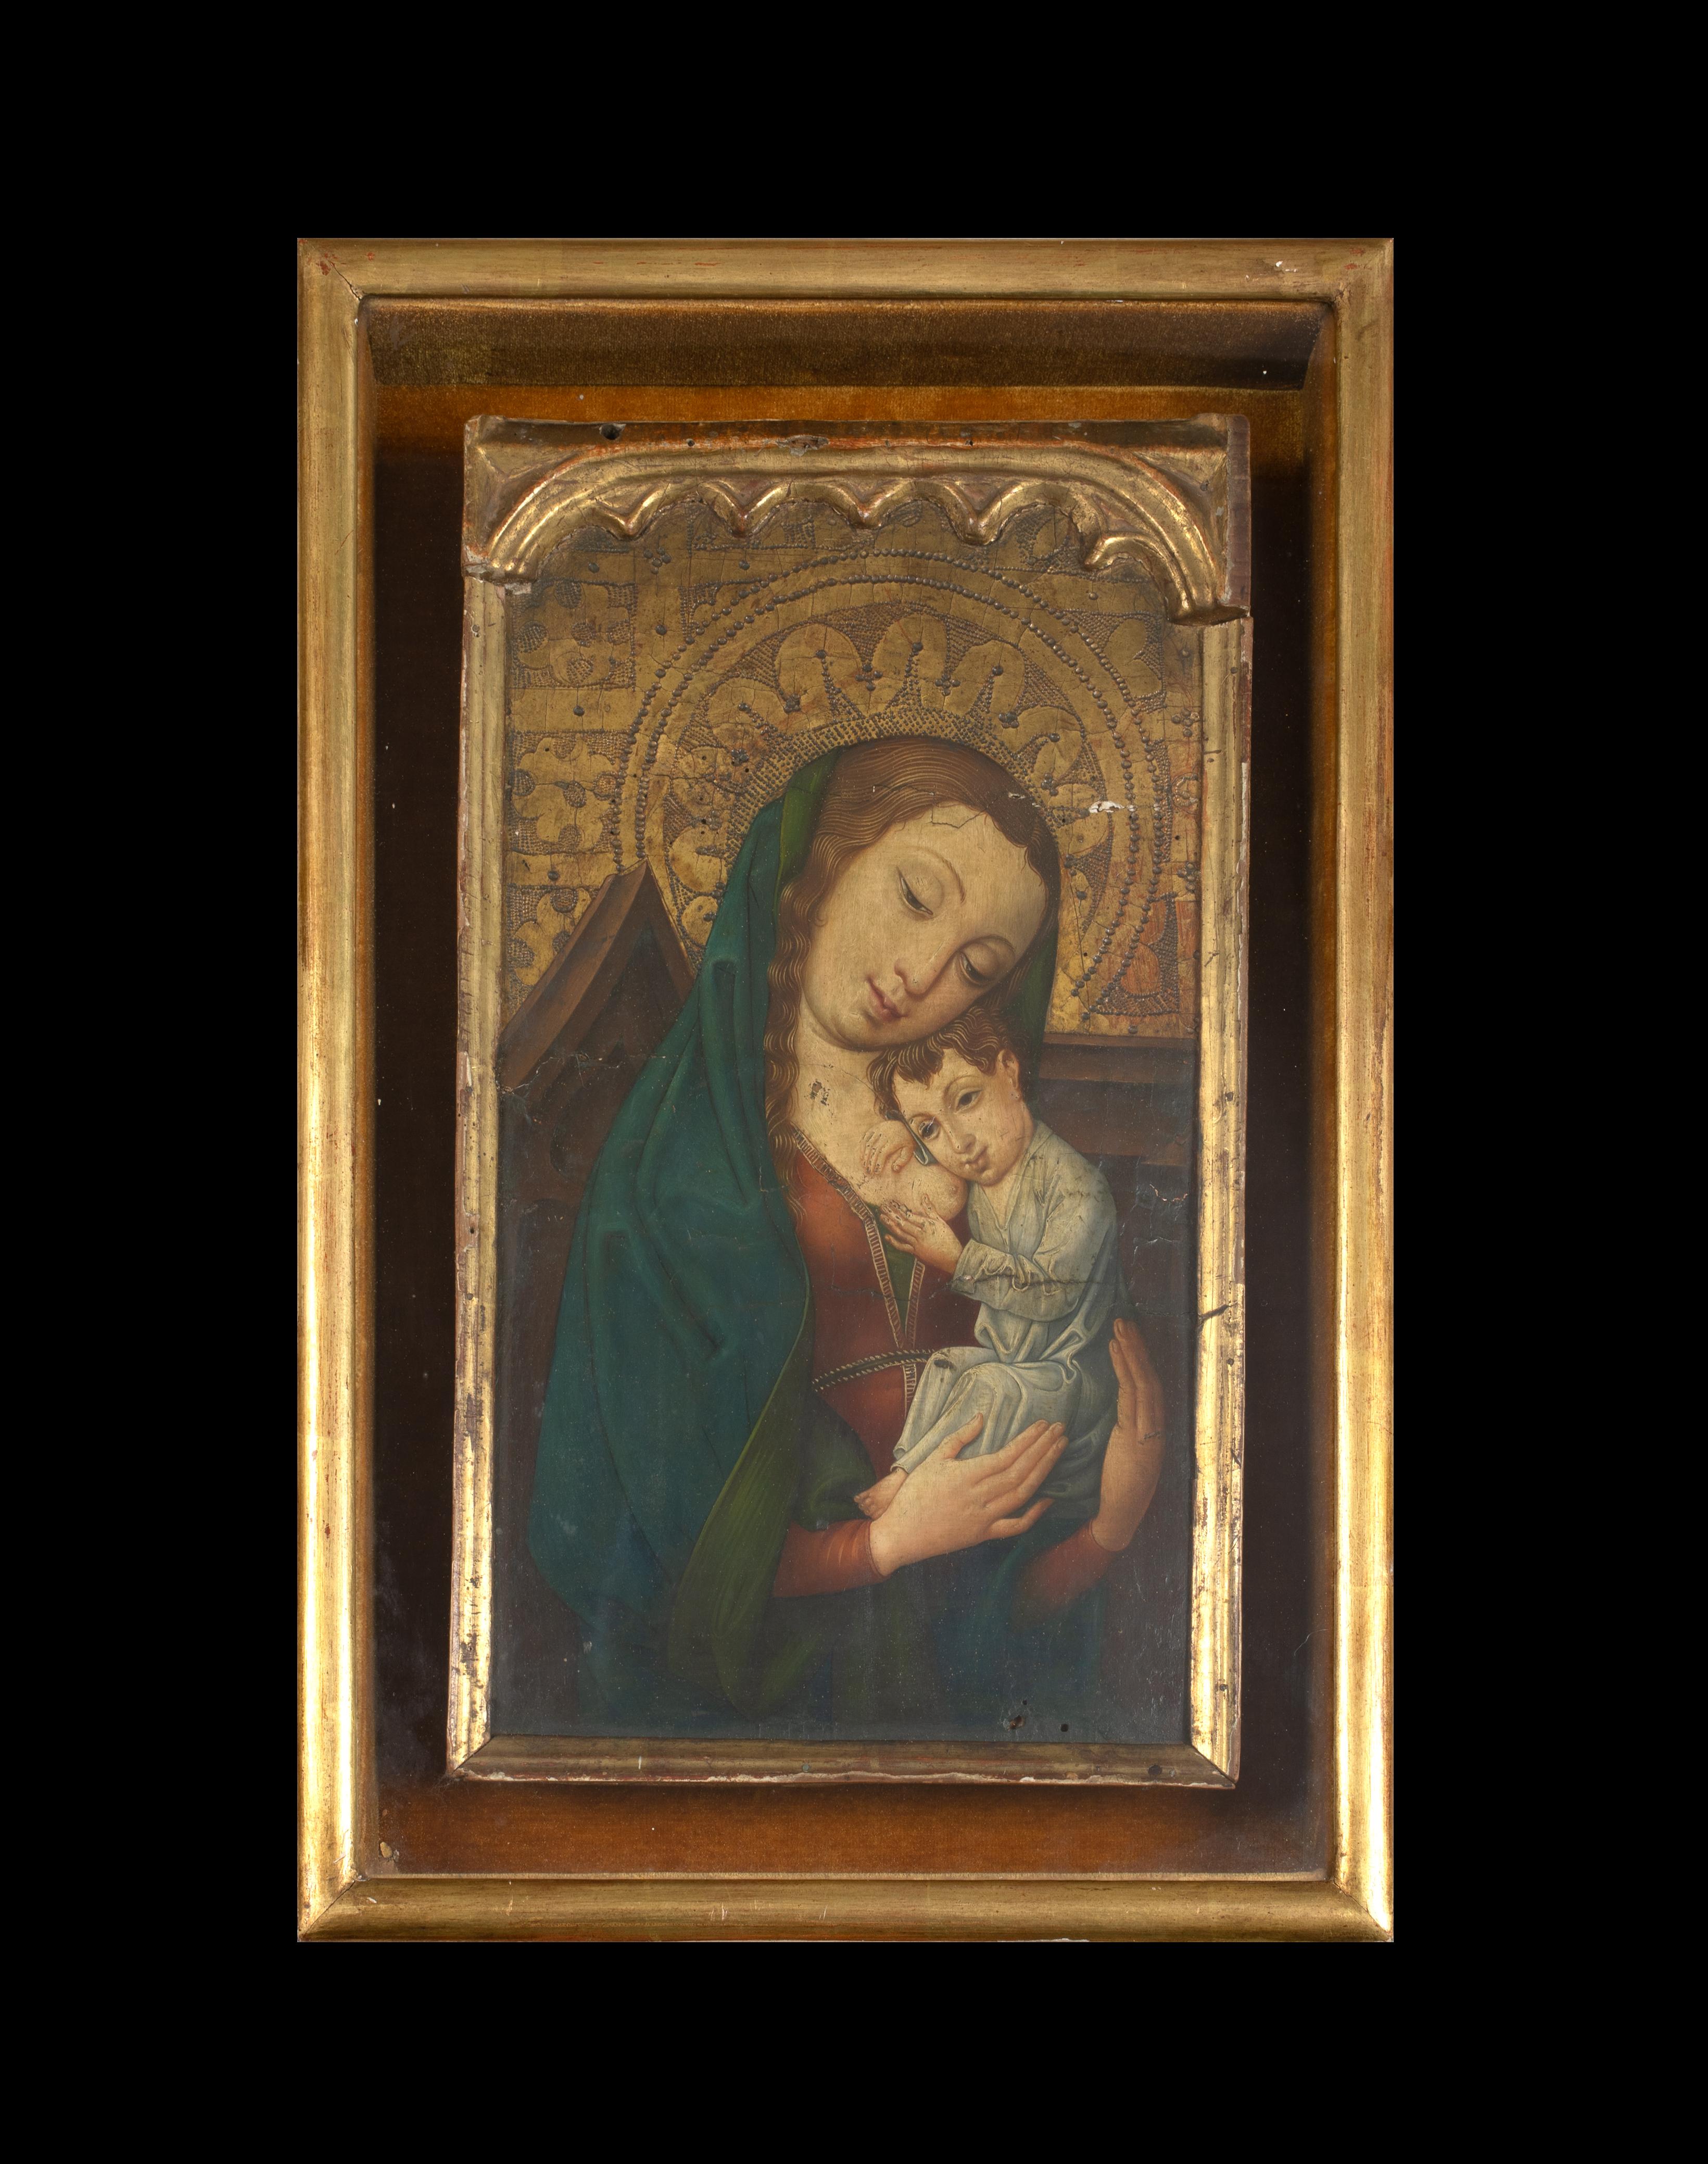 Madonna & Child, 15th Century

Tuscan School

Large 15th Century Tuscan School depiction of the Madonna & Child, tempera & gold on engraved panel. Excellent quality and condition Tuscan devotional scene of the Madonna feeding the infant Christ.